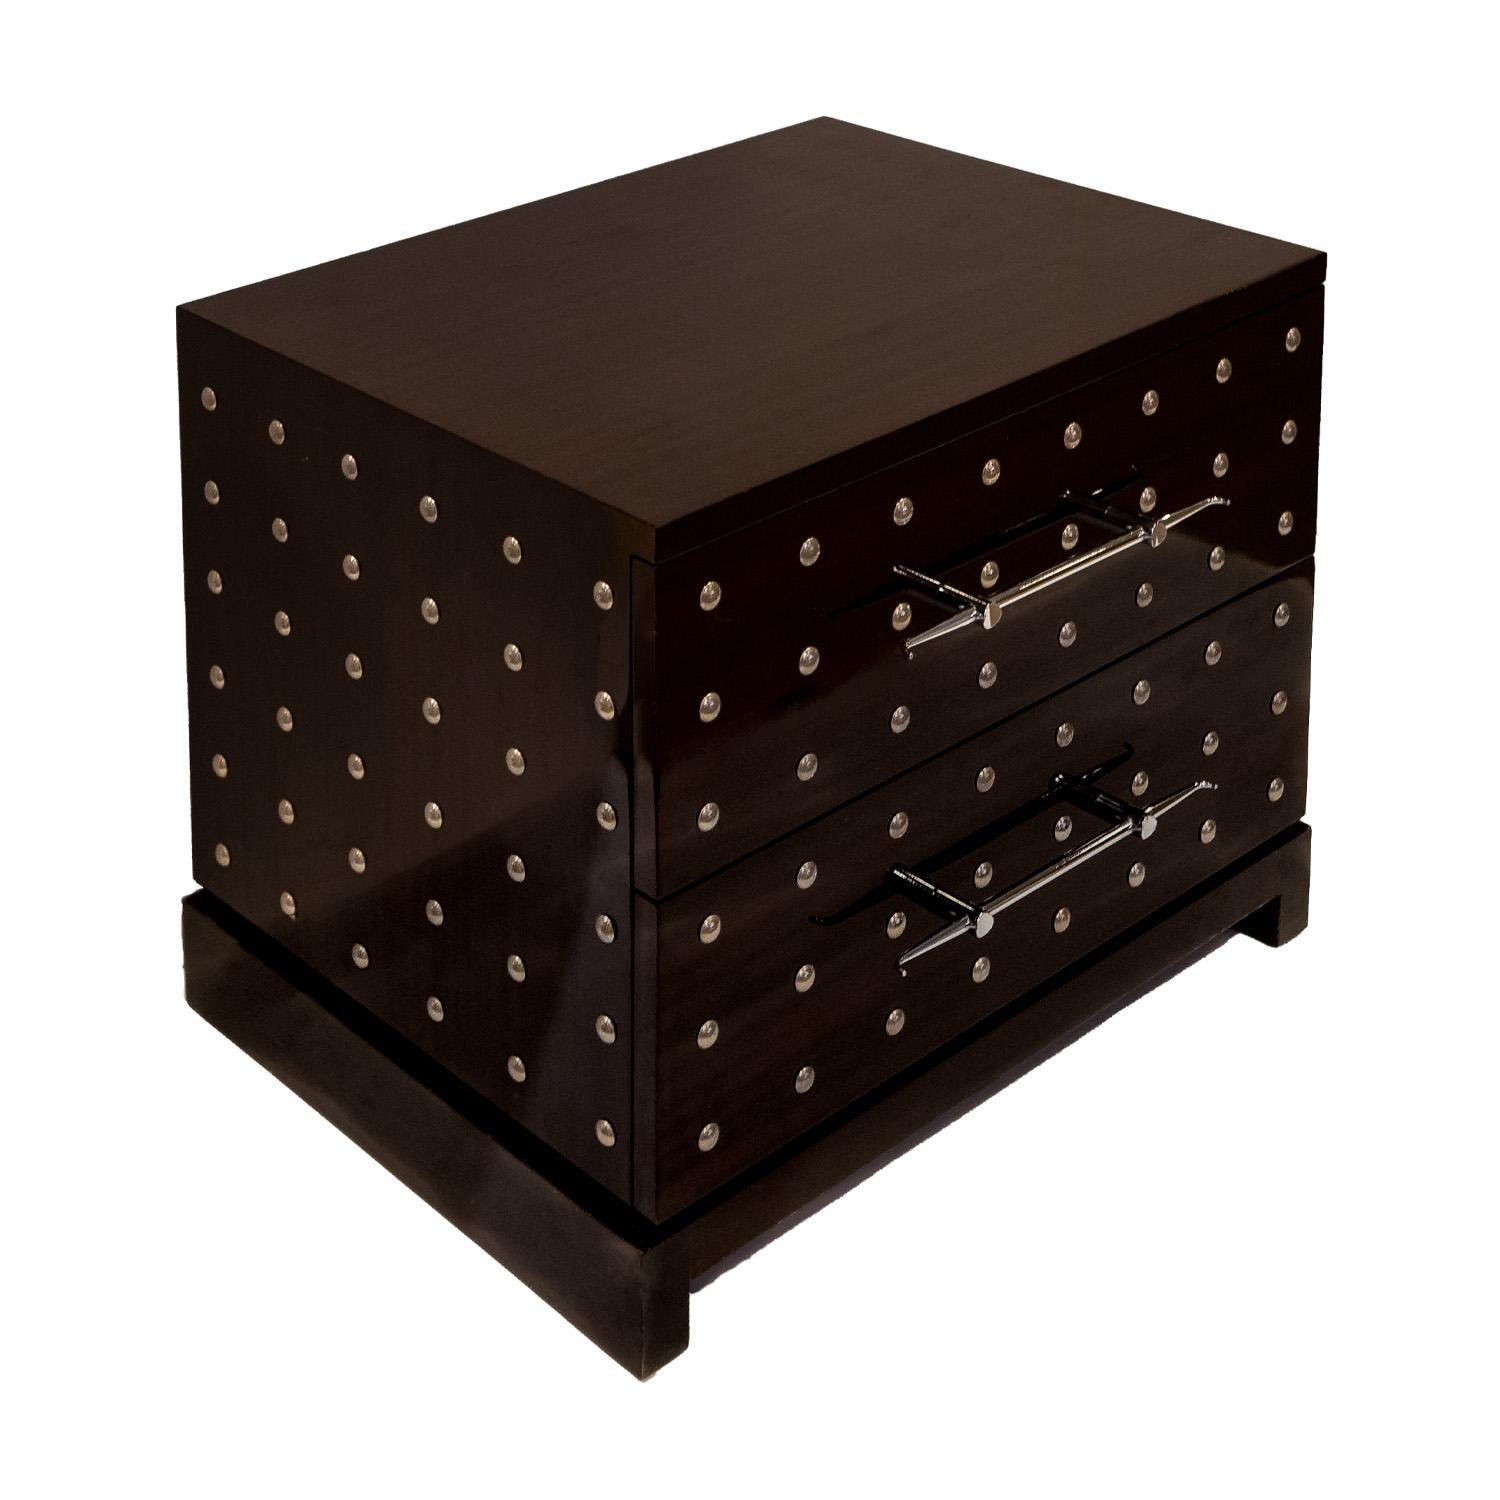 Mid-Century Modern Tommi Parzinger Iconic Studded Small Chest/Bedside Table 1981